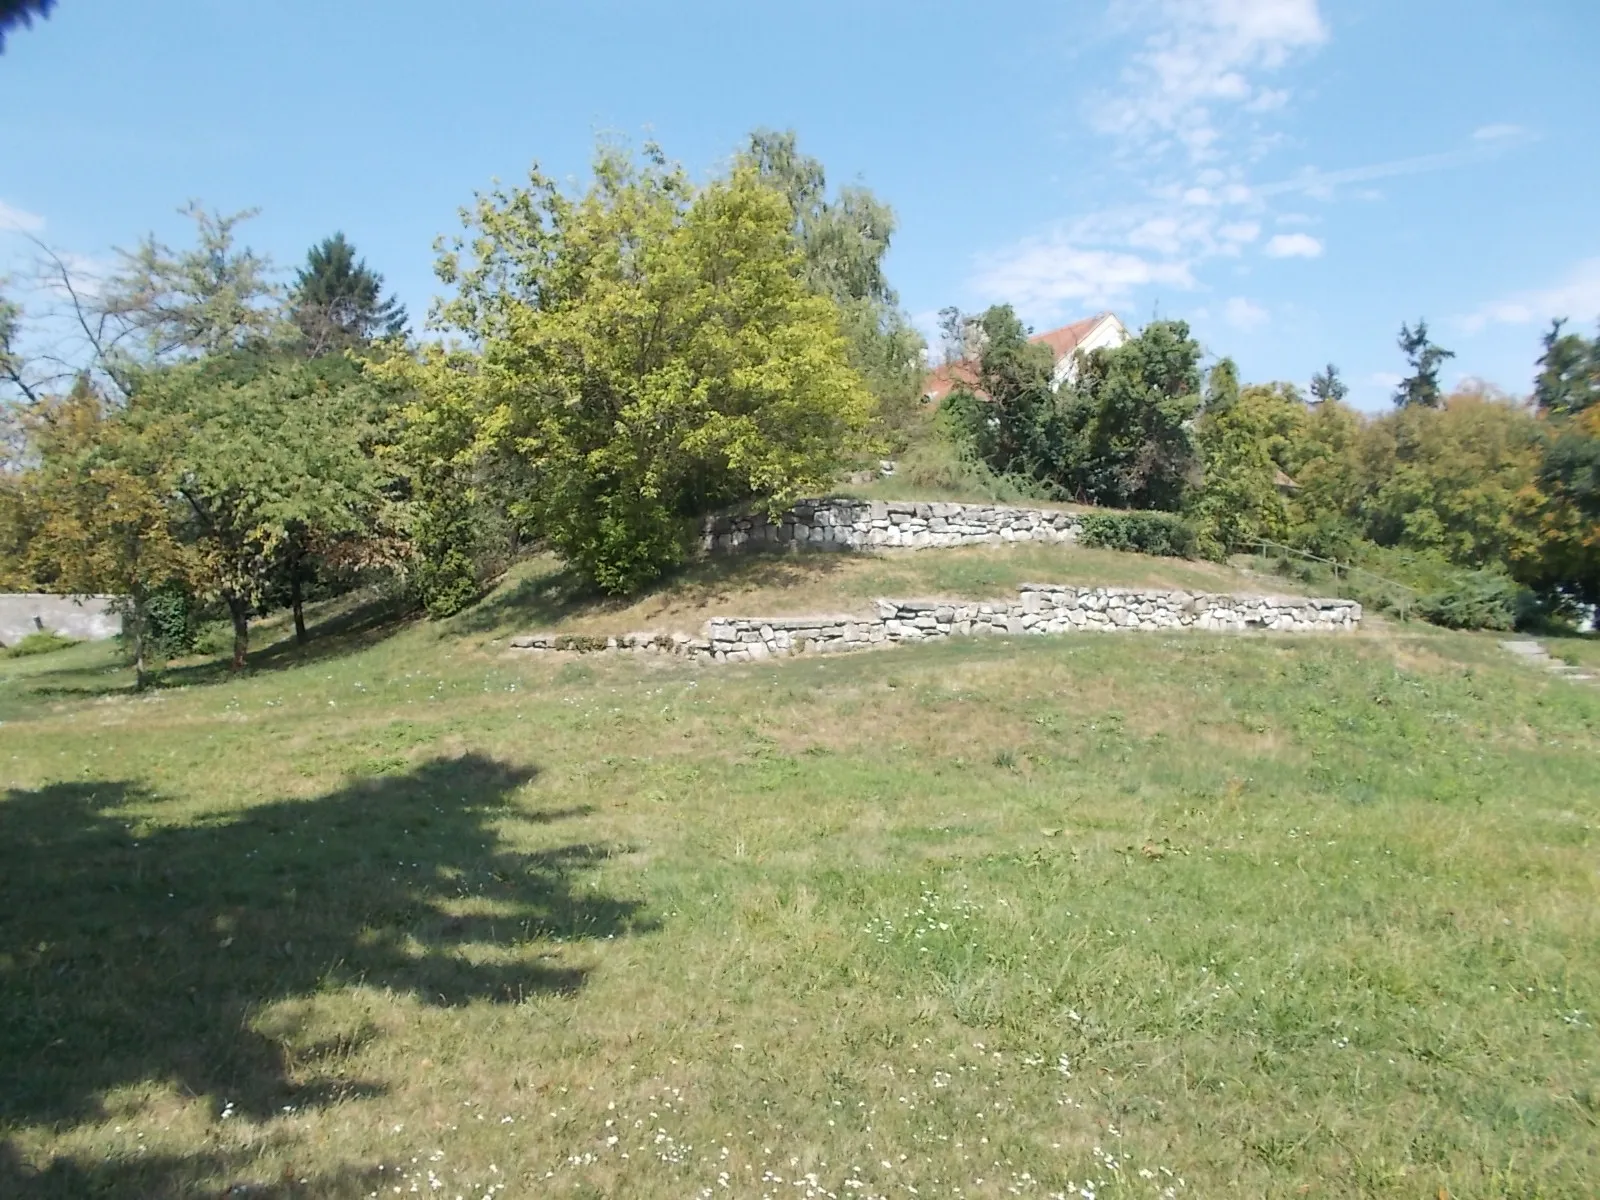 Photo showing: : Moat at the Castle Commander's house on the campus of Faculty of Agricultural and Food Science of Széchenyi István University. - Located in Magyaróvár neighborhood, Mosonmagyaróvár, Győr-Moson-Sopron County, Hungary.